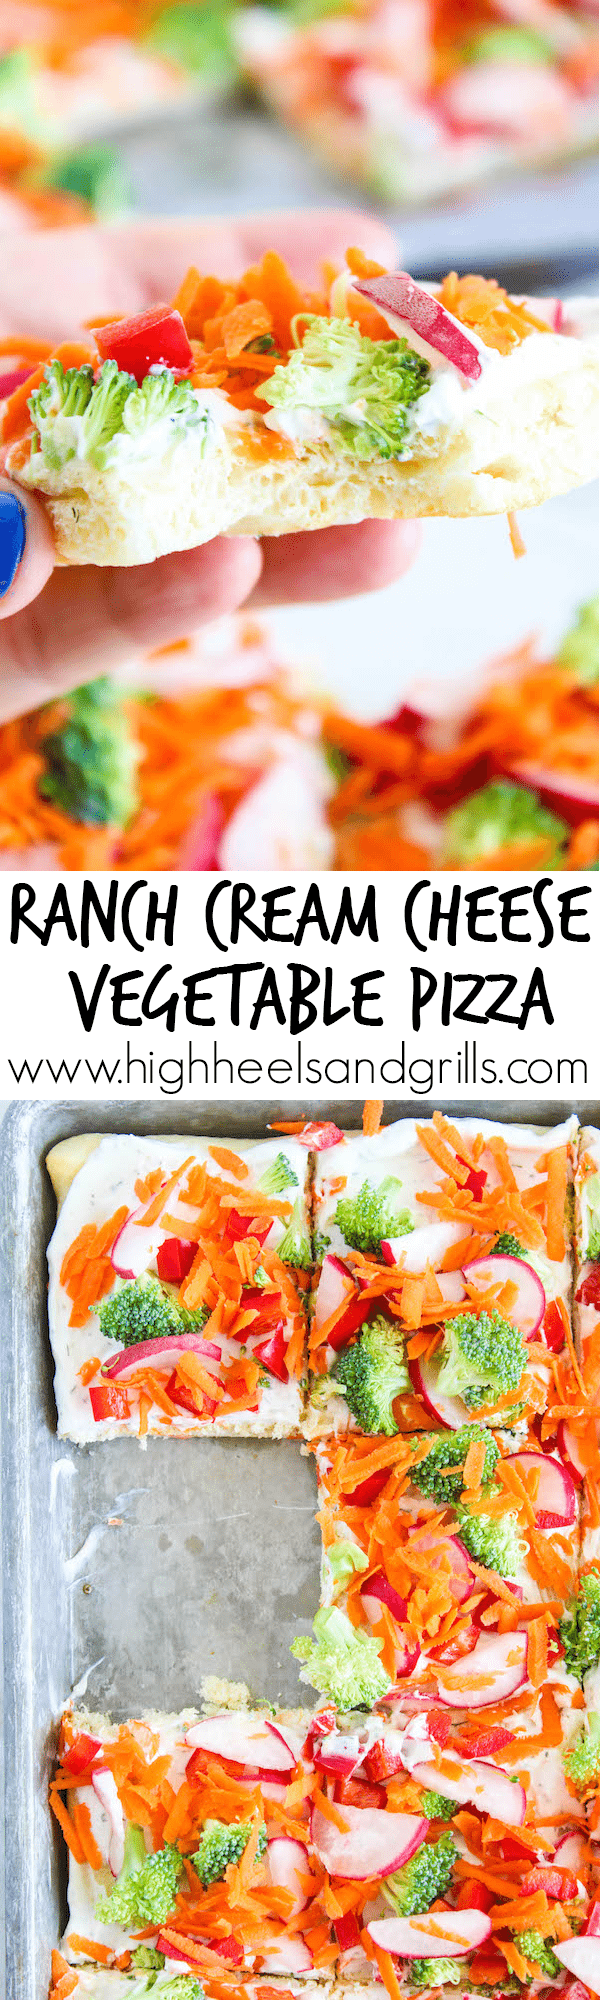 Ranch Cream Cheese Vegetable Pizza - This stuff is the bomb. It's the easiest thing in the world to make and everyone I know that has tried it, has loved it!